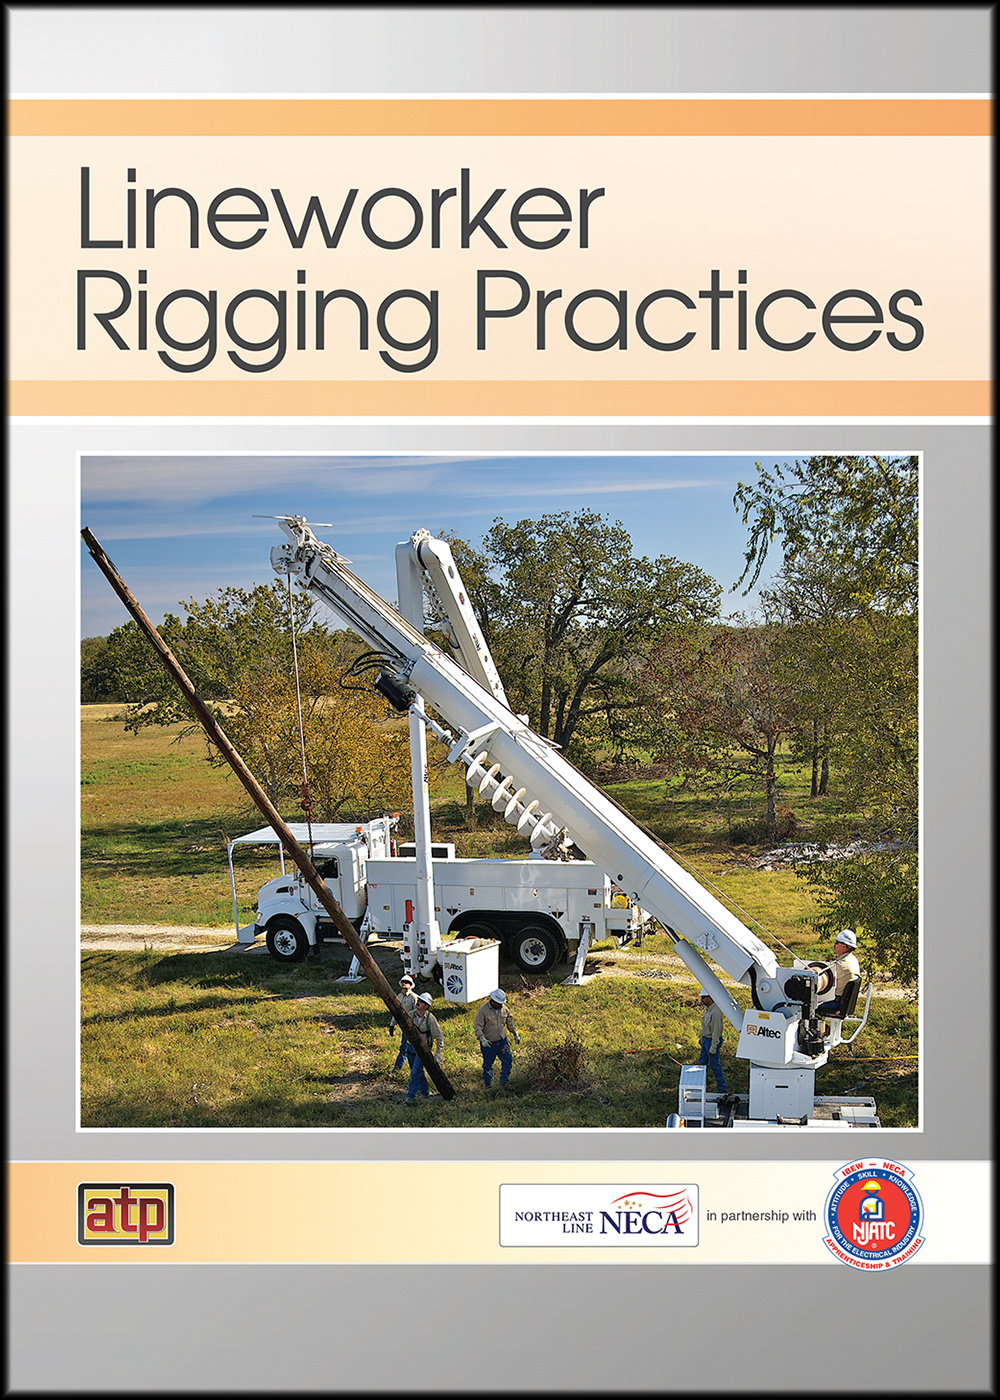 180 Day Subscription: Lineworker Rigging Practices (180-Day Rental)